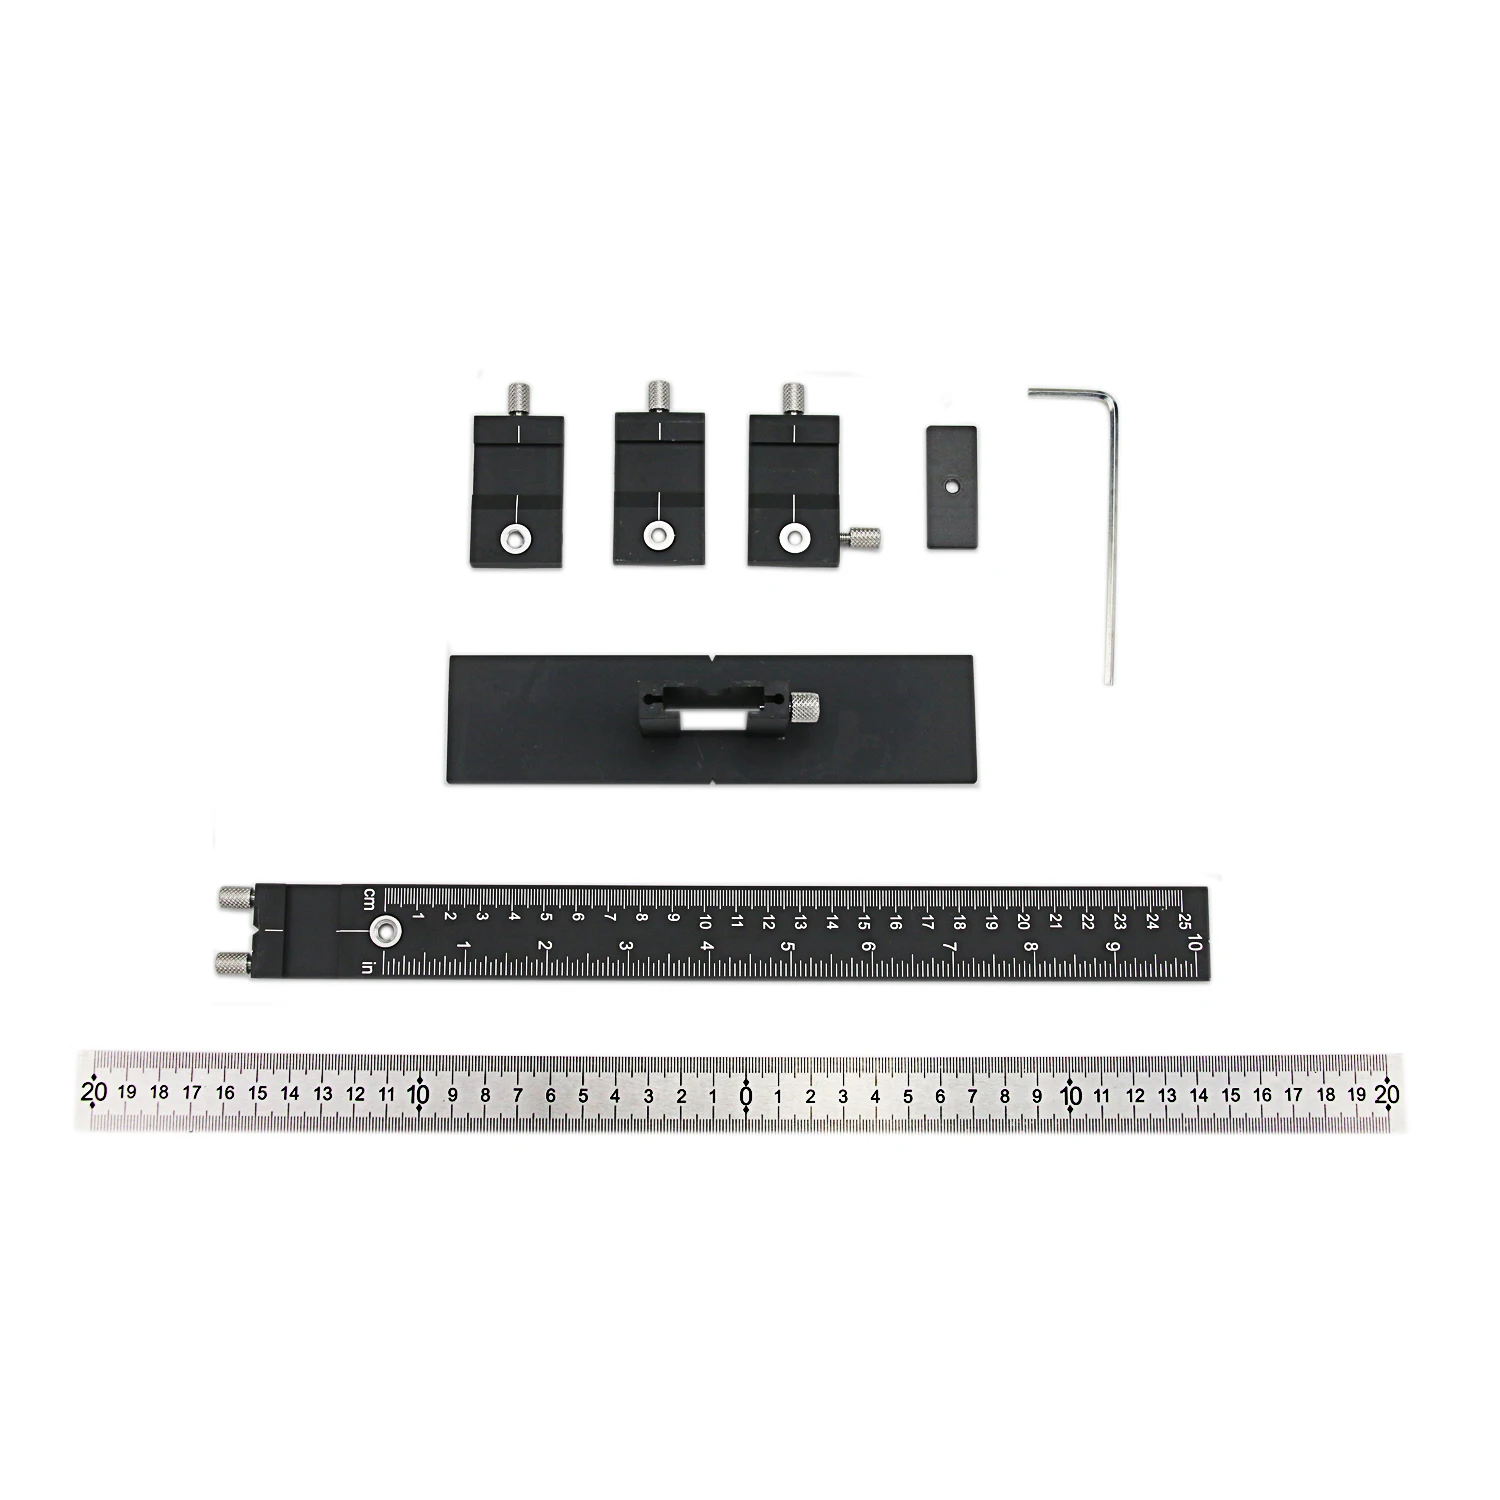 Liberty Align Right Cabinet Hardware Installation Template Set